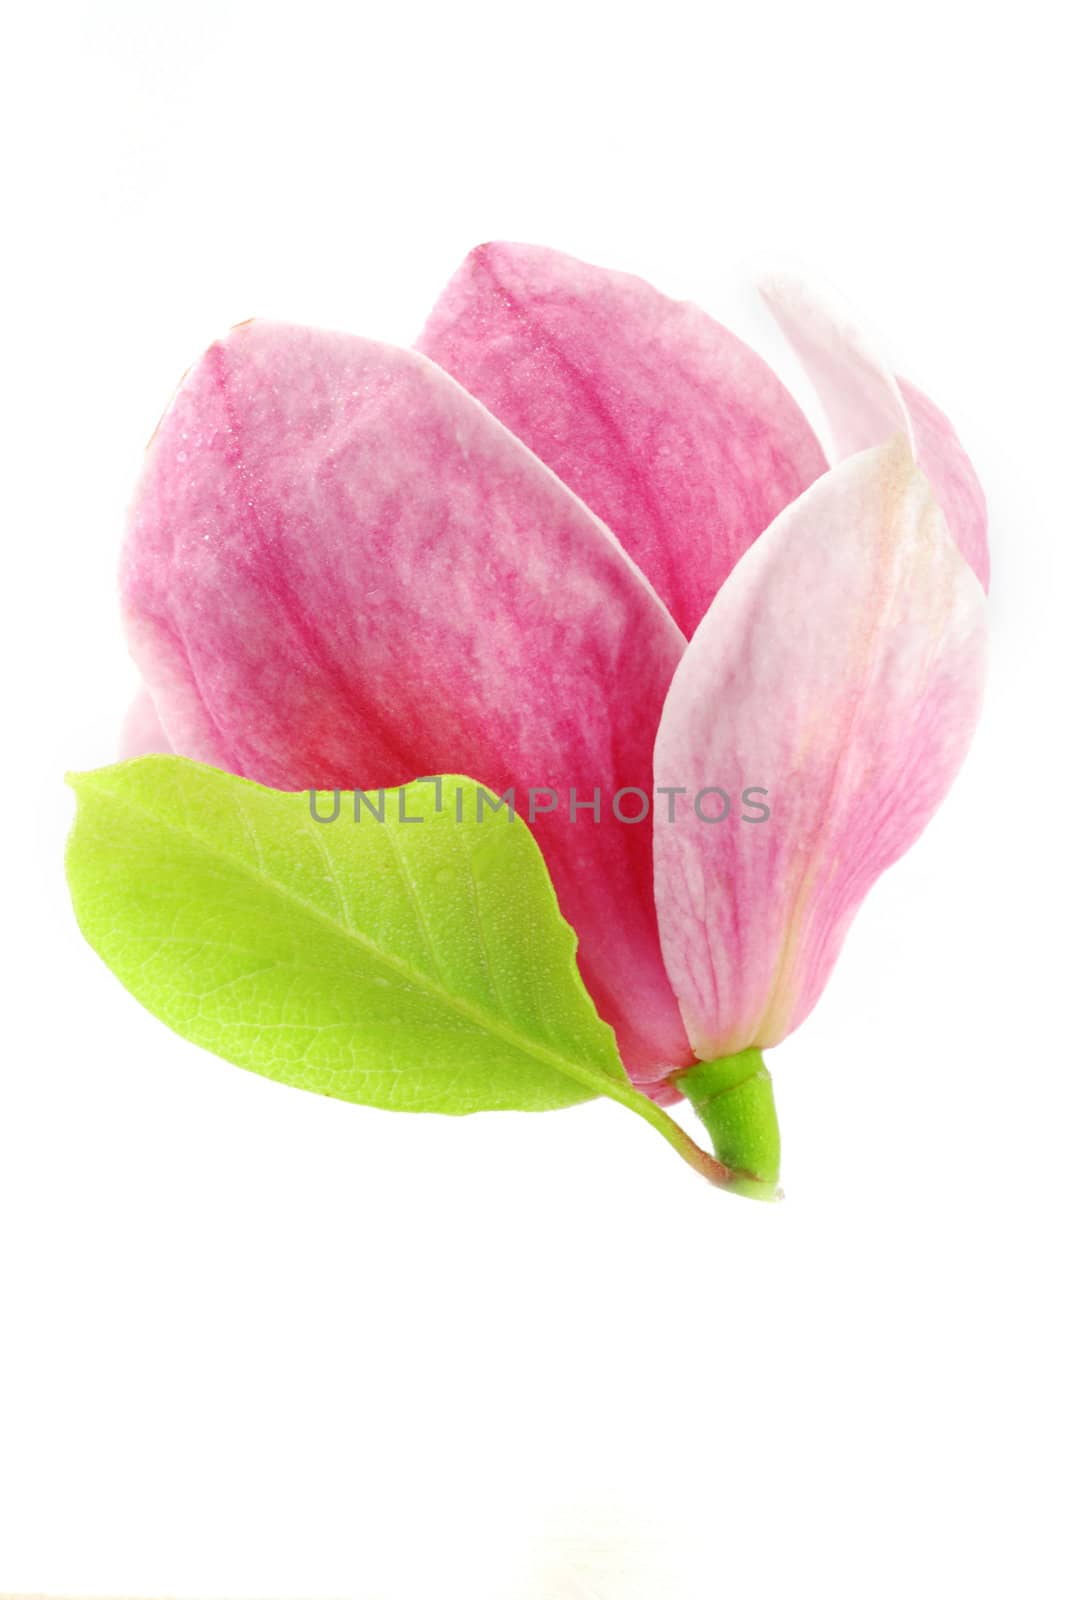 Beautiful pink bloom of magnolia with a green leaf